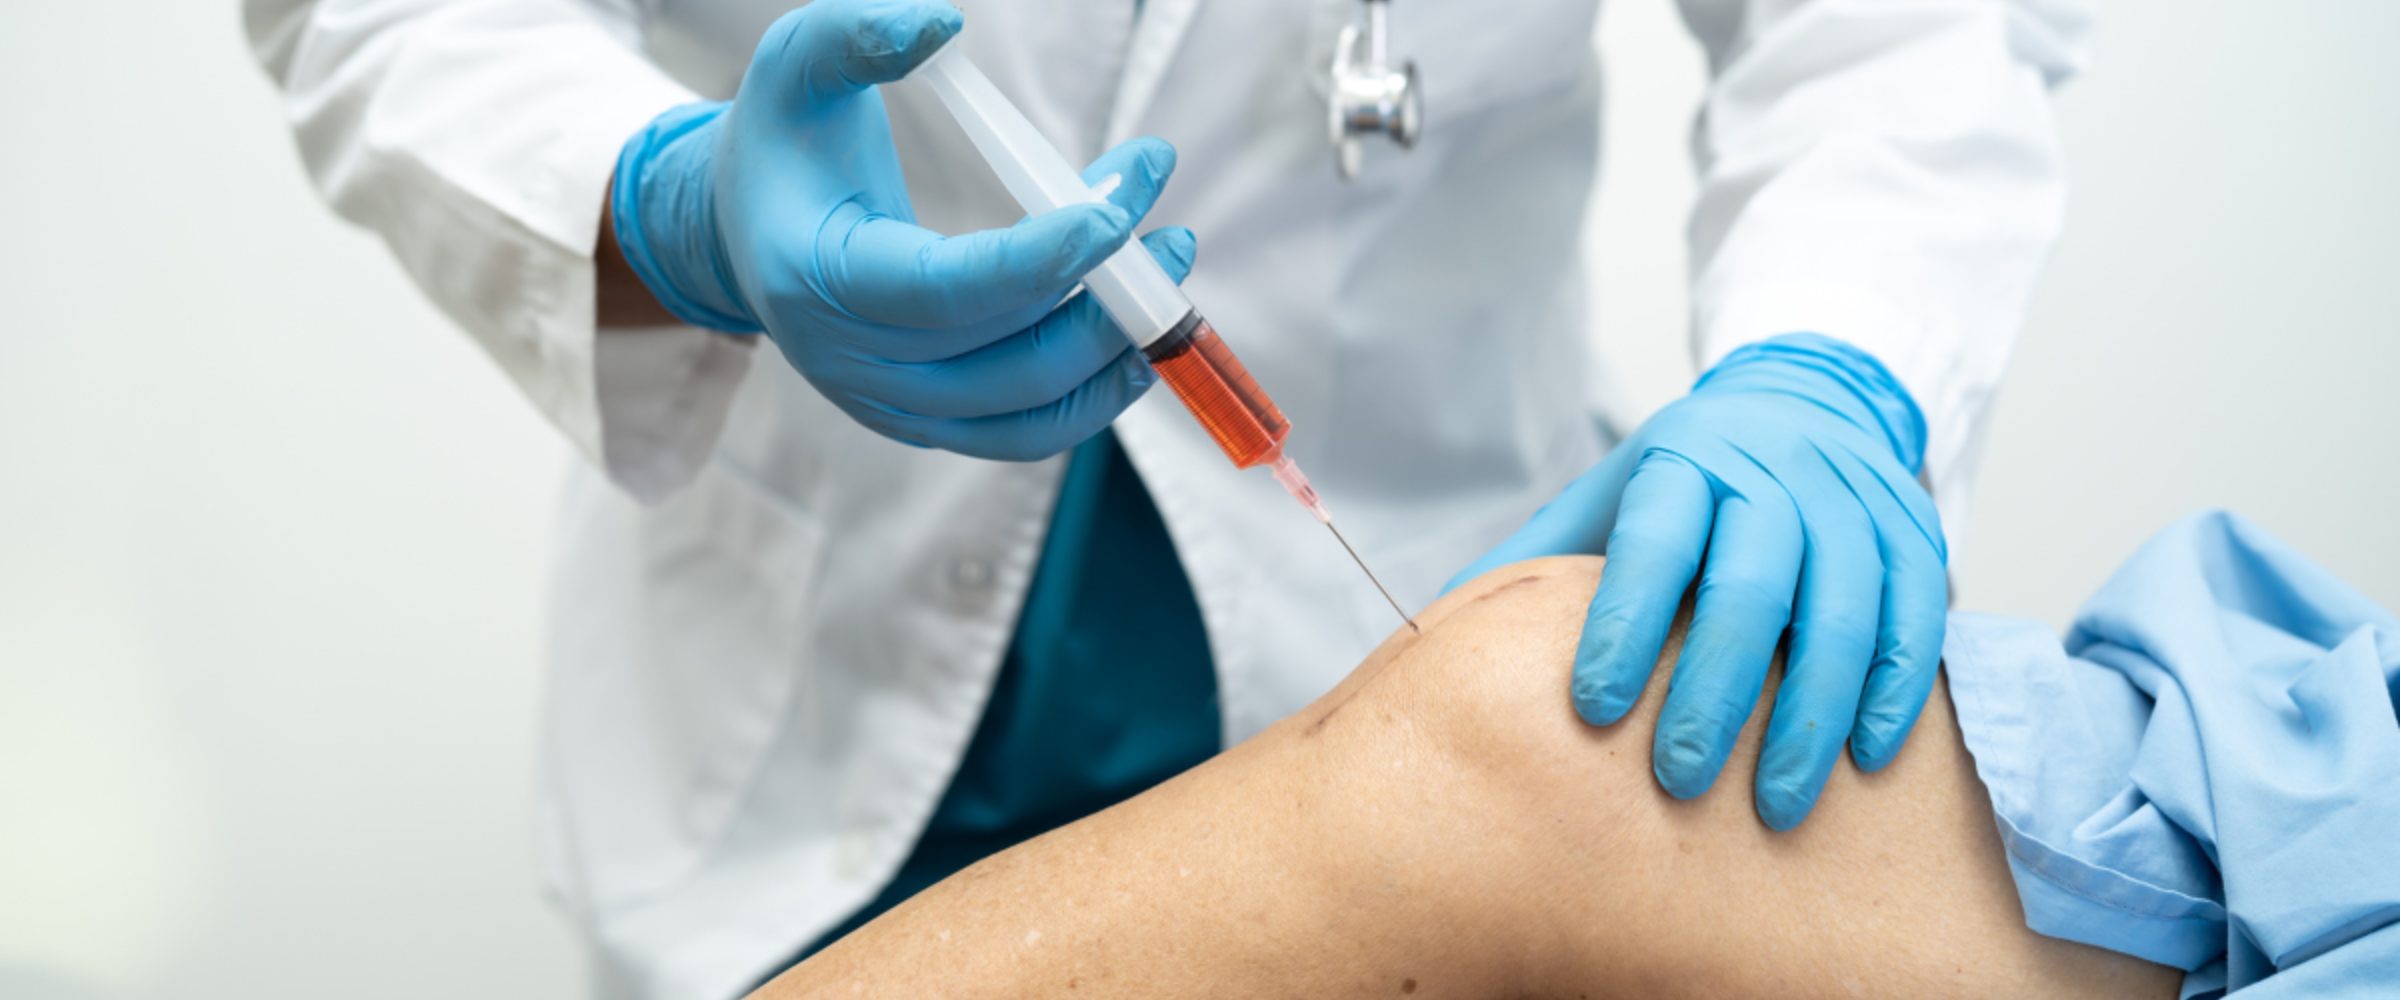 Platelet-Rich-Plasma Injection for Chronic Knee Pain